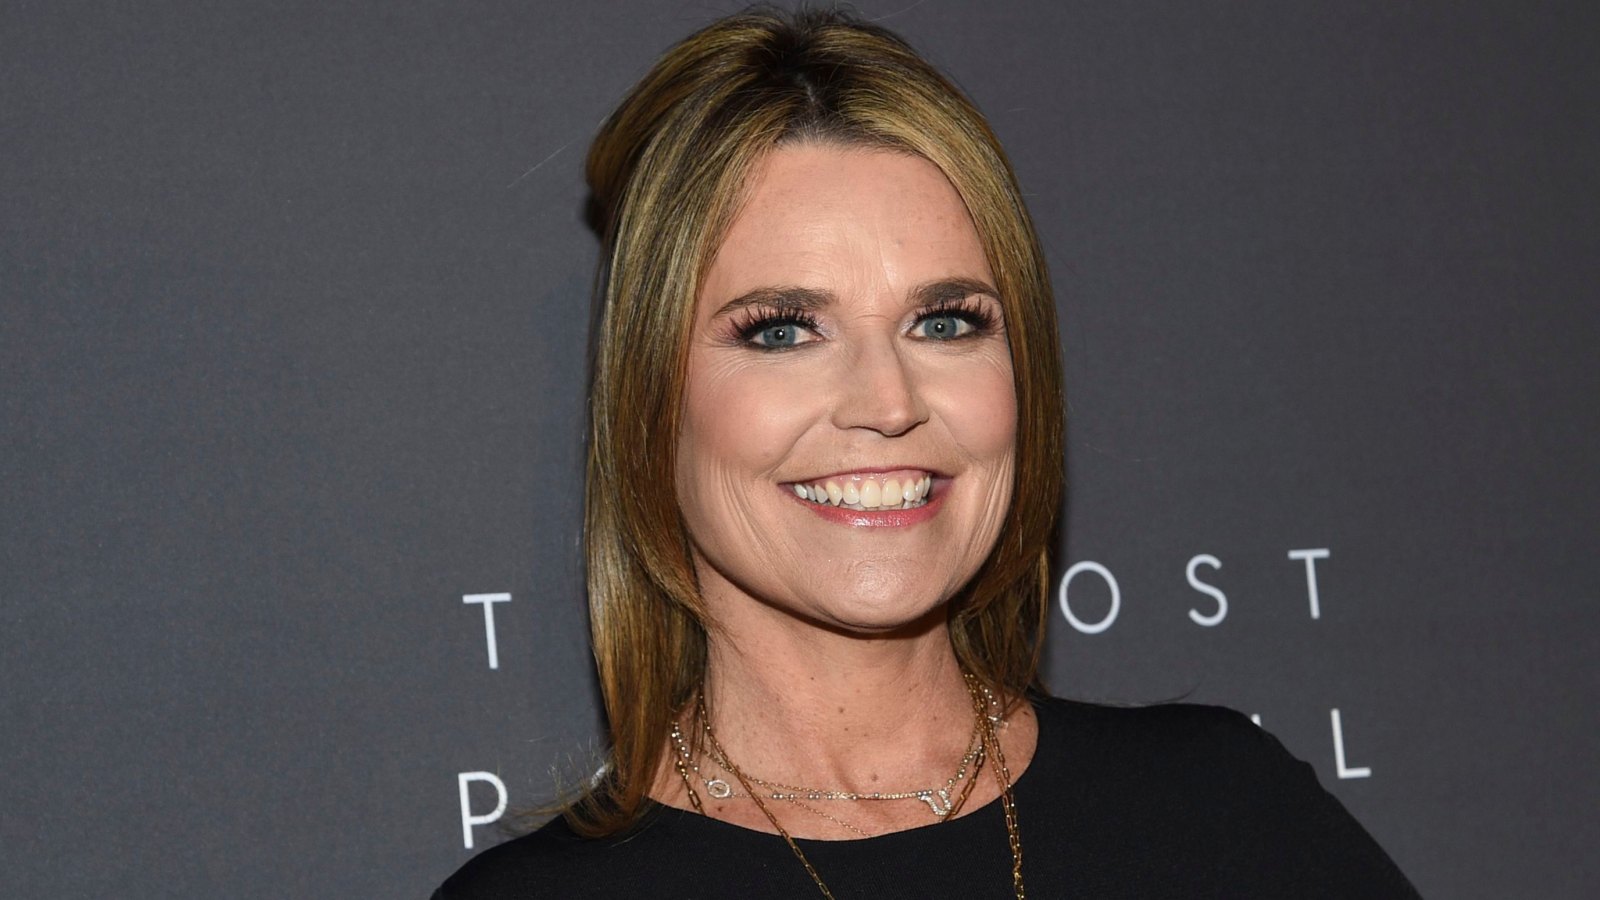 Savannah Guthrie to Host ‘Today’ From Her Basement